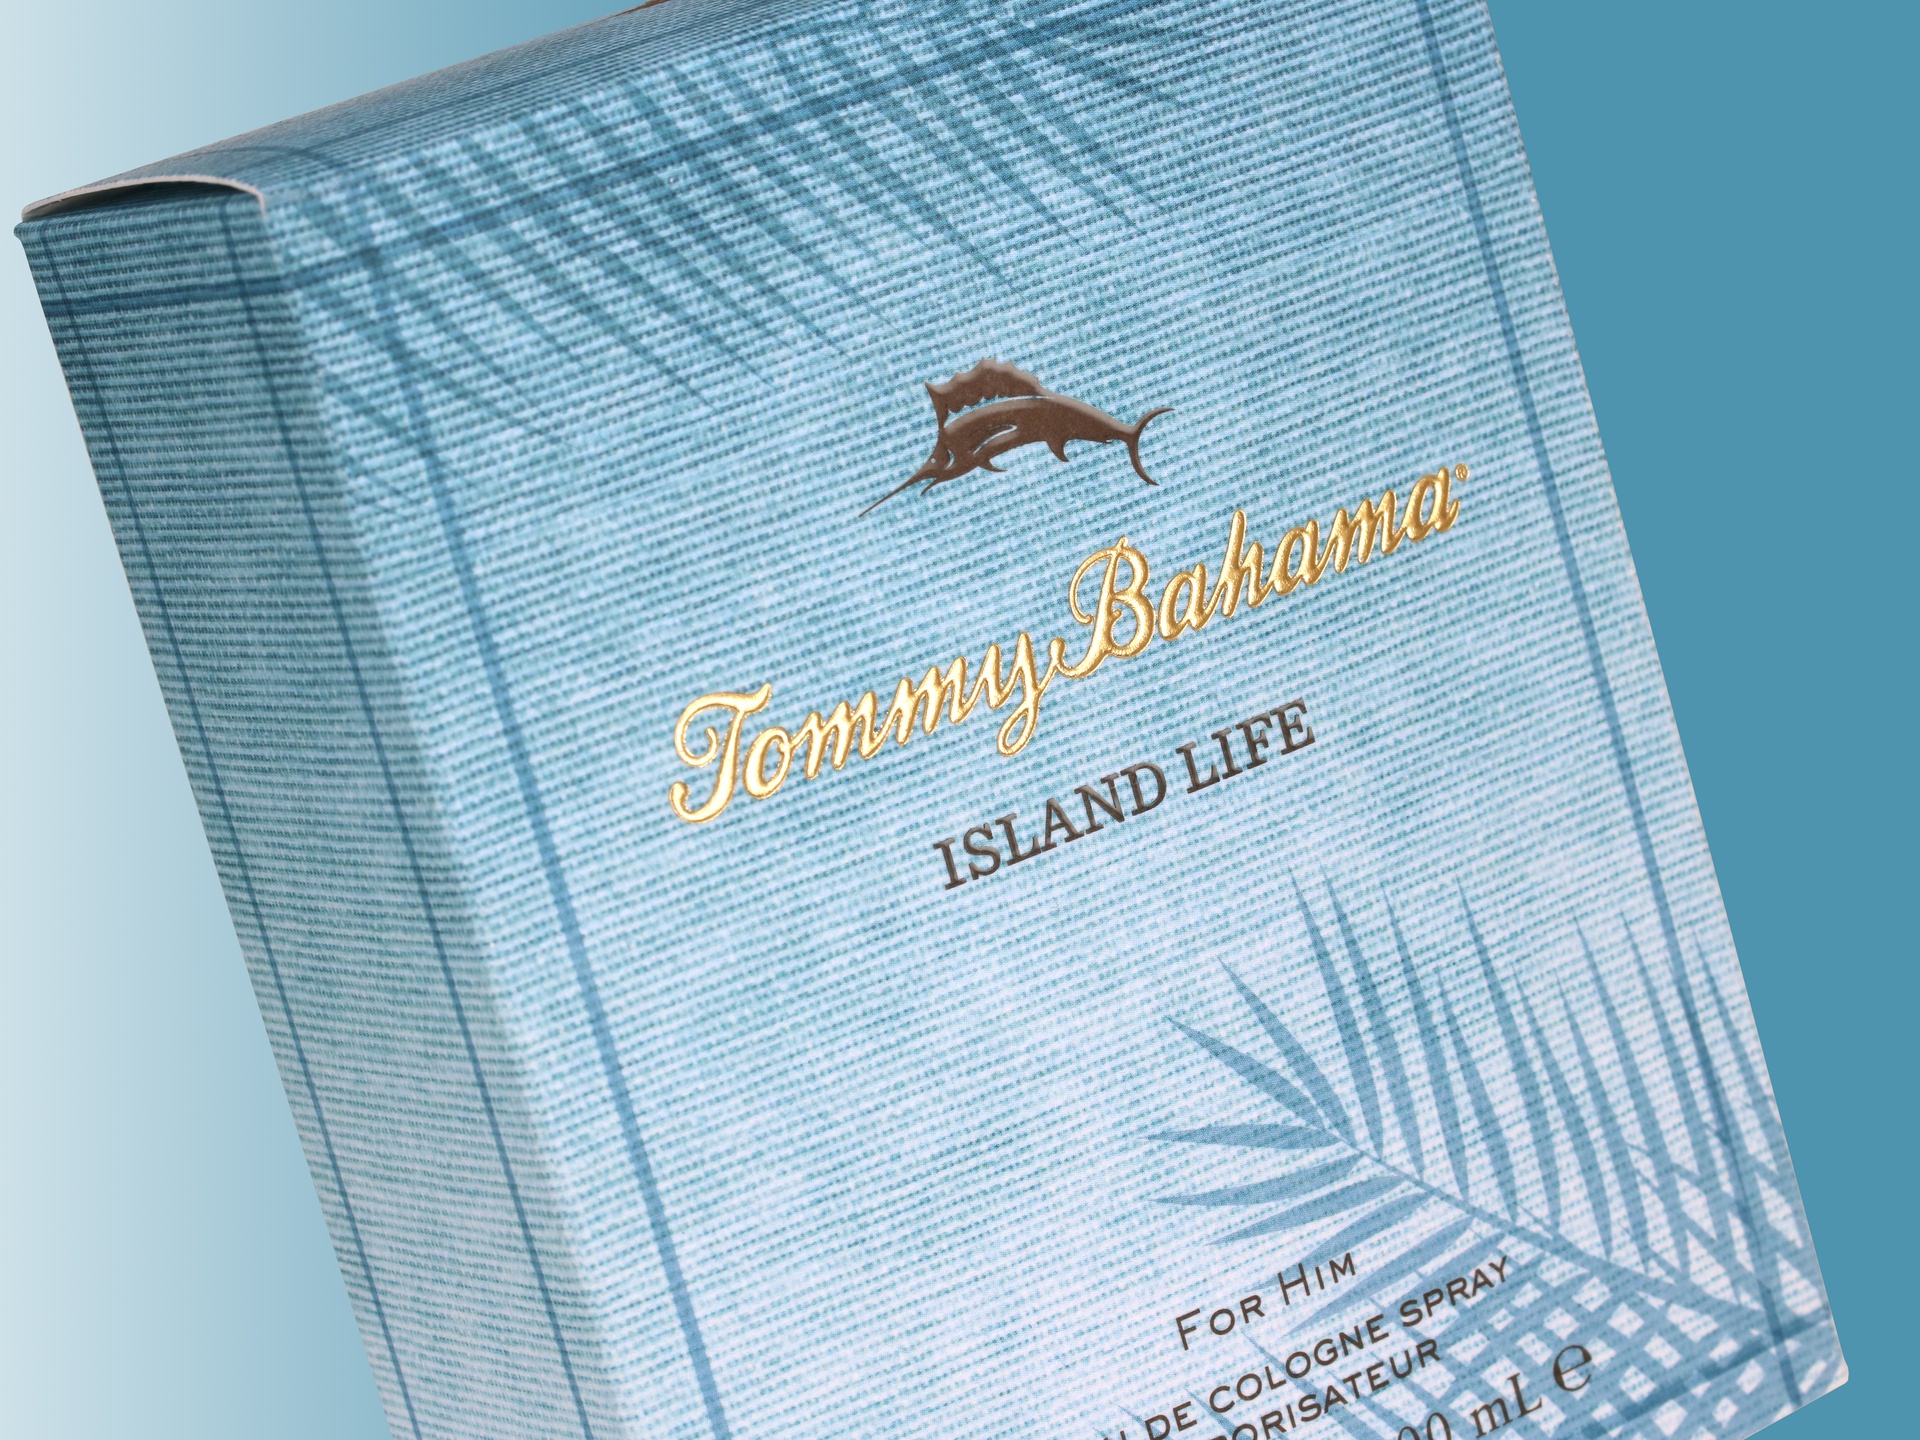 Tommy Bahama Island Life packaging